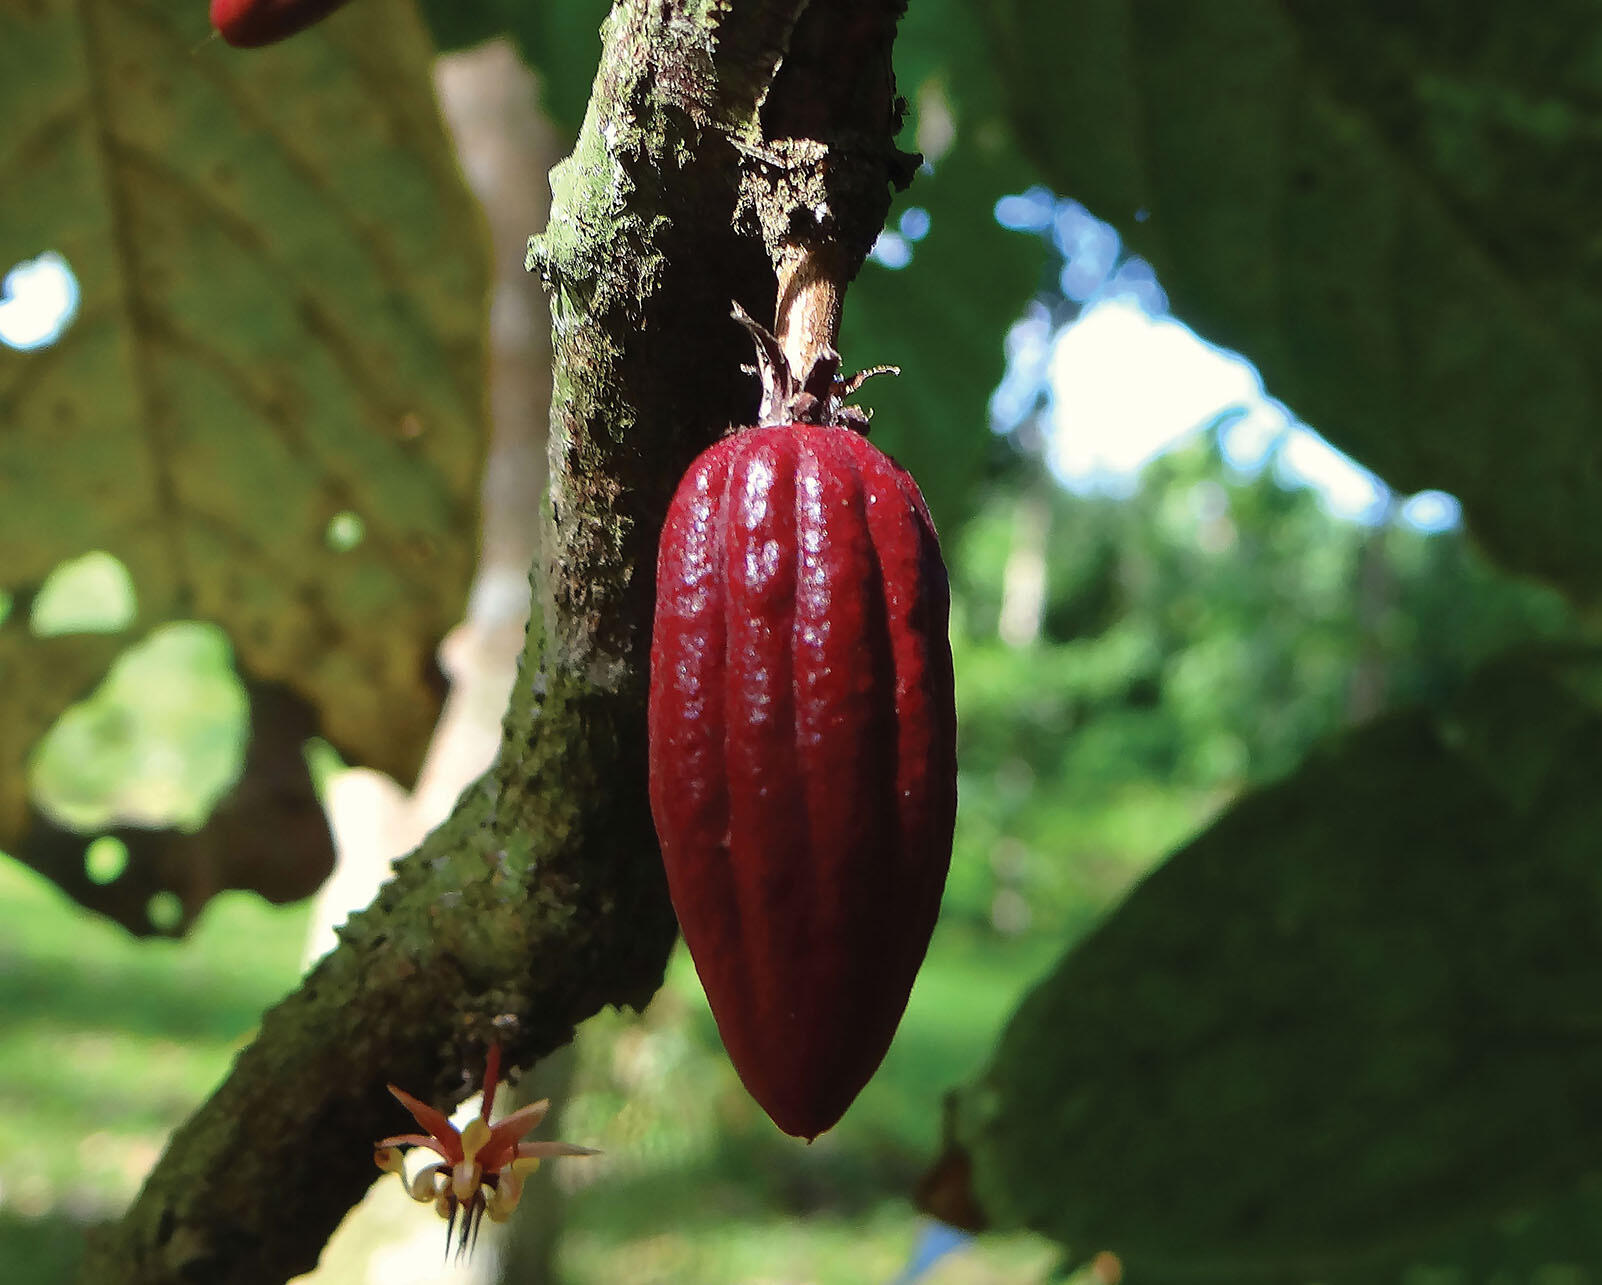 The pale flower on the trunk and large maroon fruit of the cacao plant (Theobroma cacao).